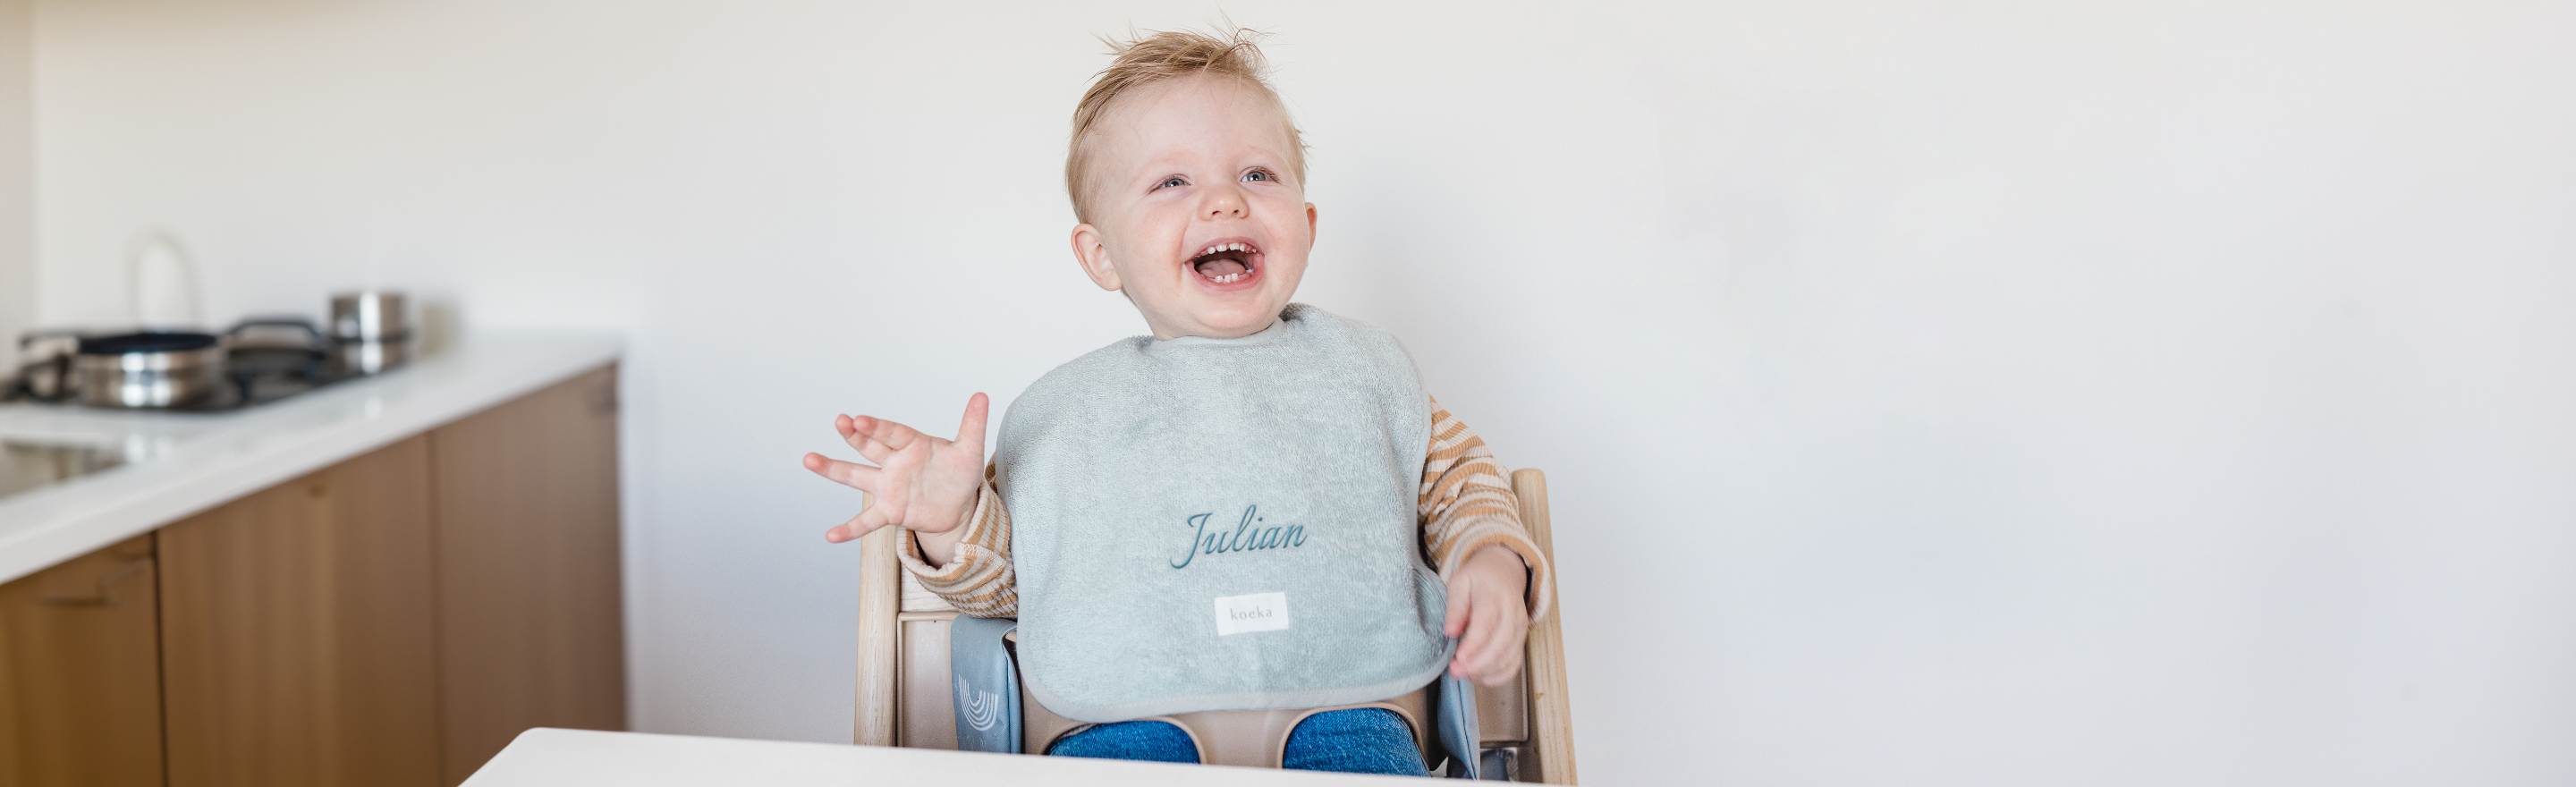 Personalised Gifts for Boys